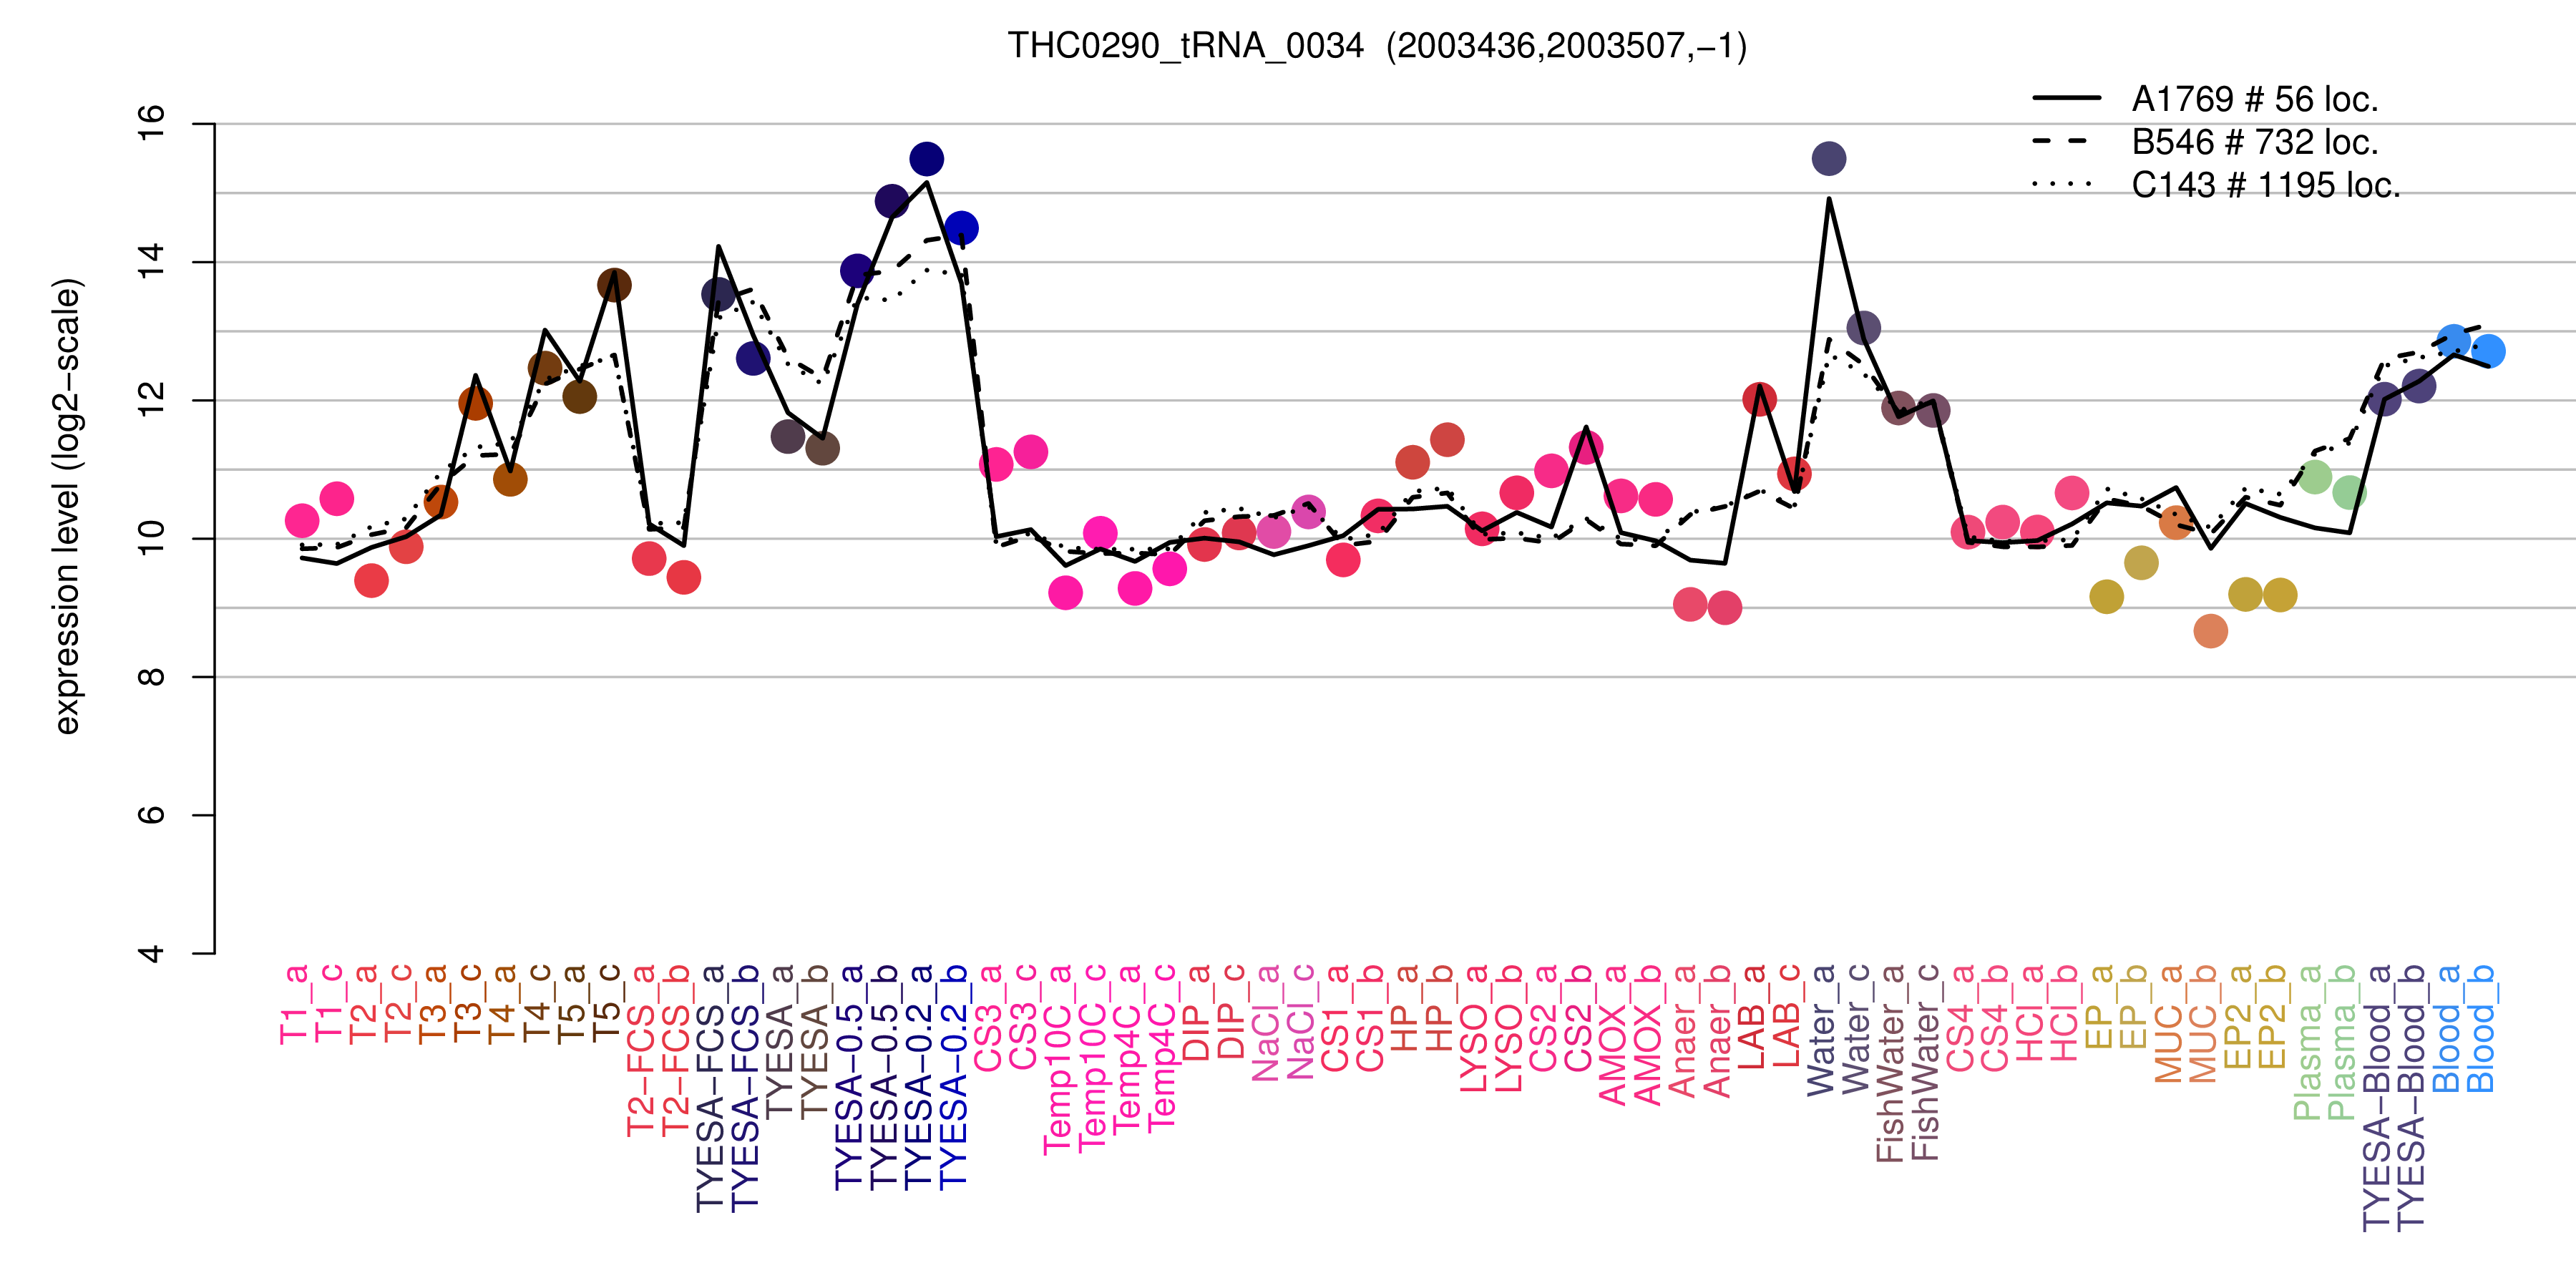 THC0290_tRNA_0034 expression levels among conditions